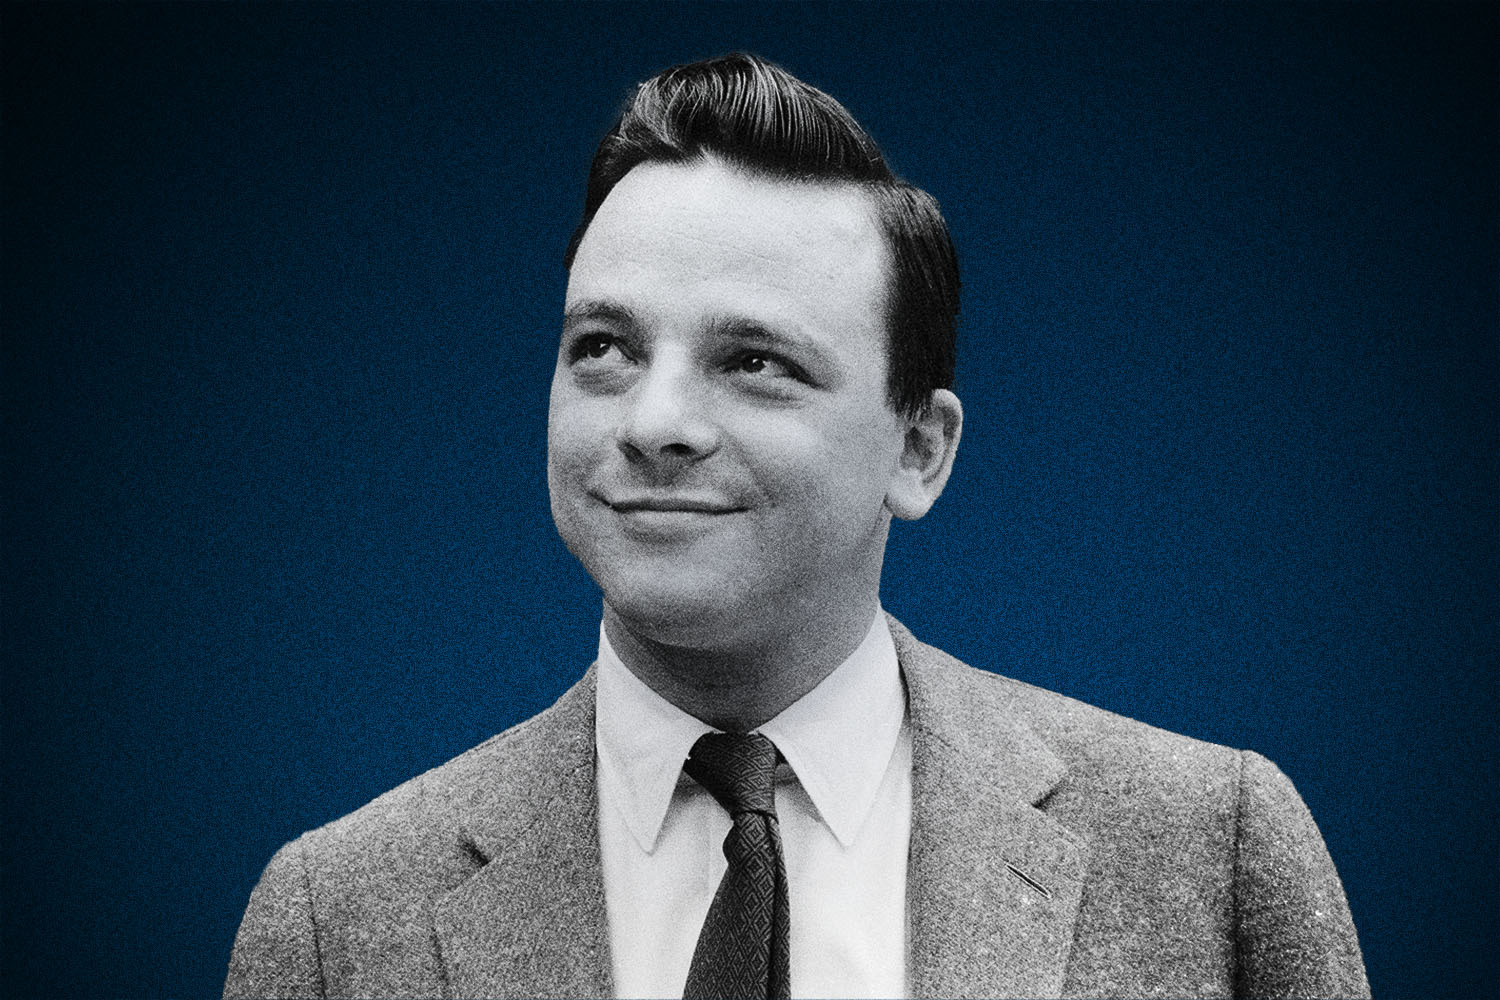 A young Stephen Sondheim in 1962 wearing a suit and tie with his hair slicked. The black and white photo shows him the year he released "A Funny Thing Happened on the Way to the Forum." He died last month in November 2021.